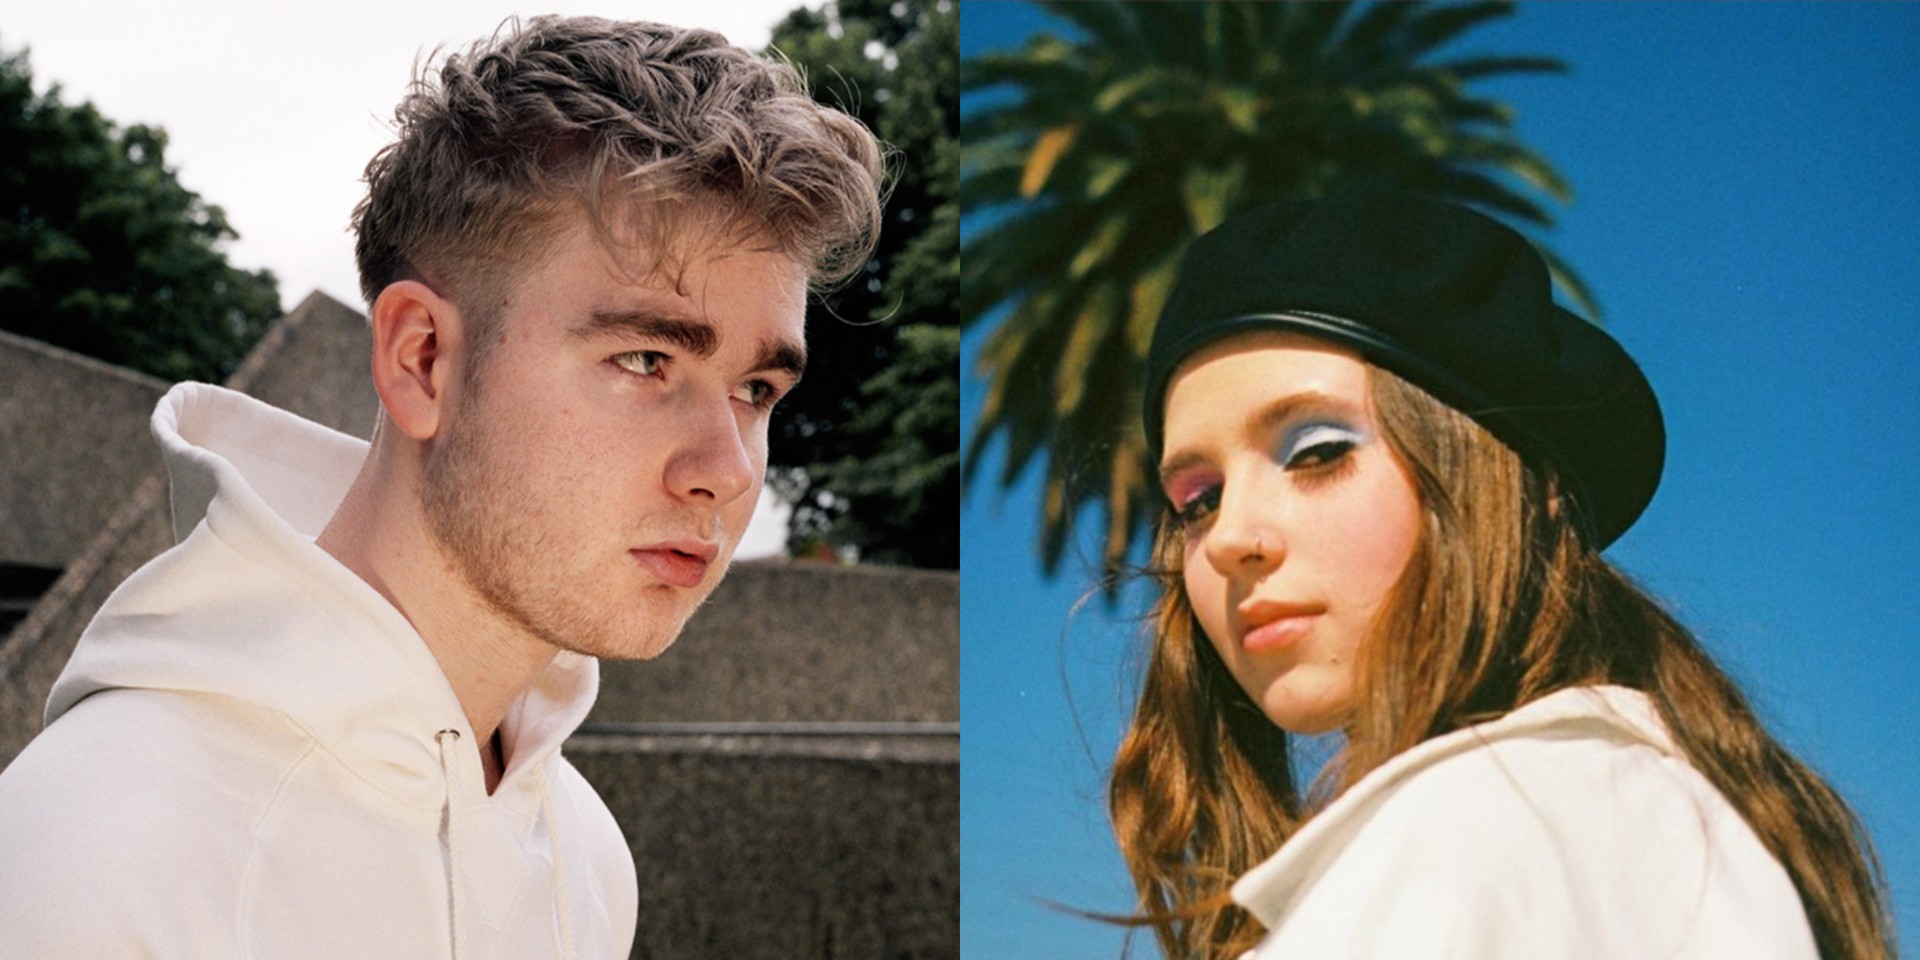 Mura Masa and Clairo unveil new rock-inspired single, 'I Don't Think I Can Do This Again' – listen 